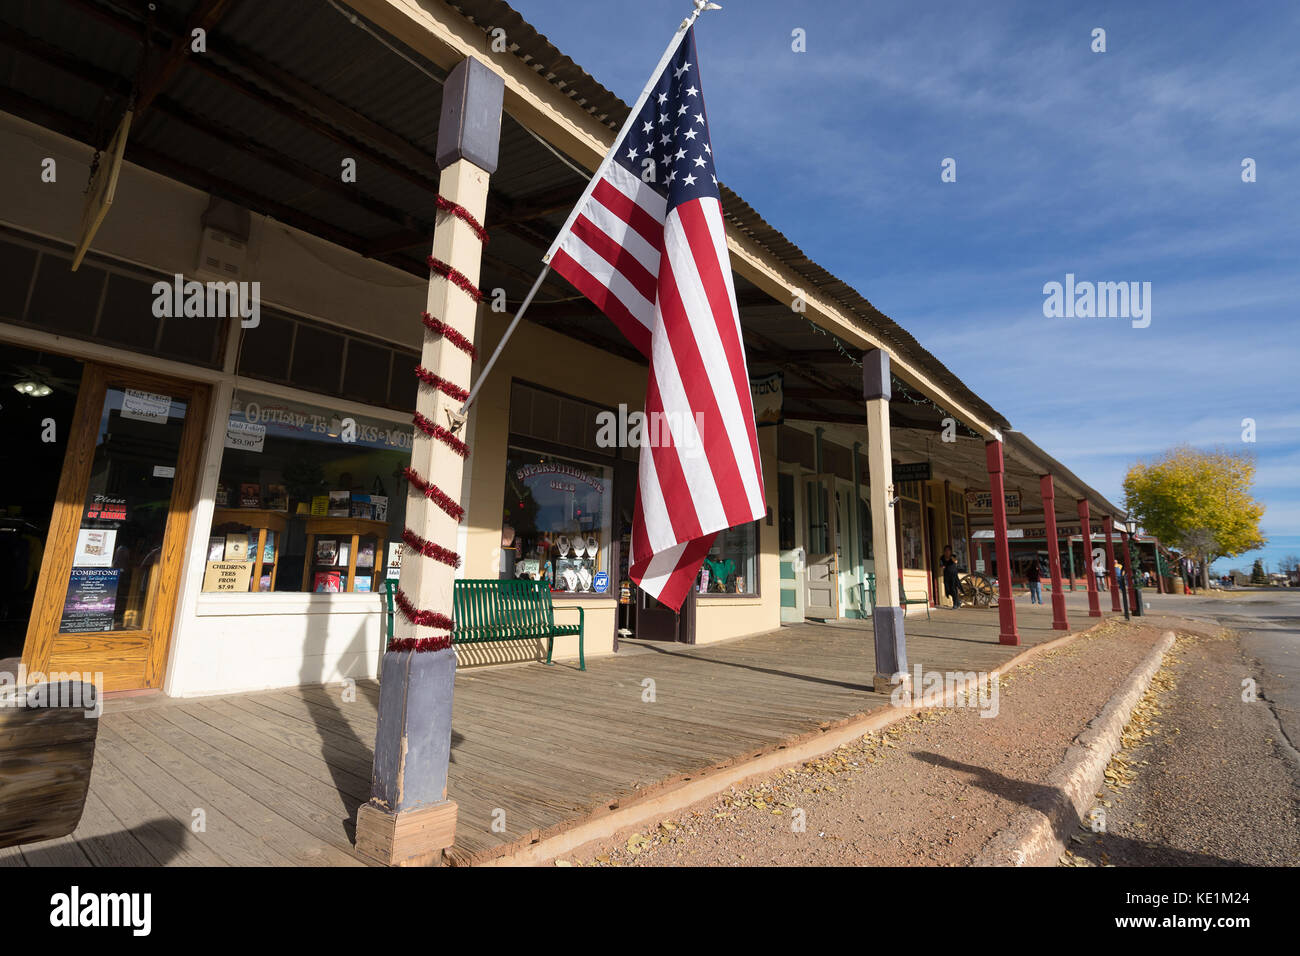 December 9, 2015 Tombstone, Arizona, USA: national flag decorating a bulding on the main street of the historic western town founded in 1879 Stock Photo